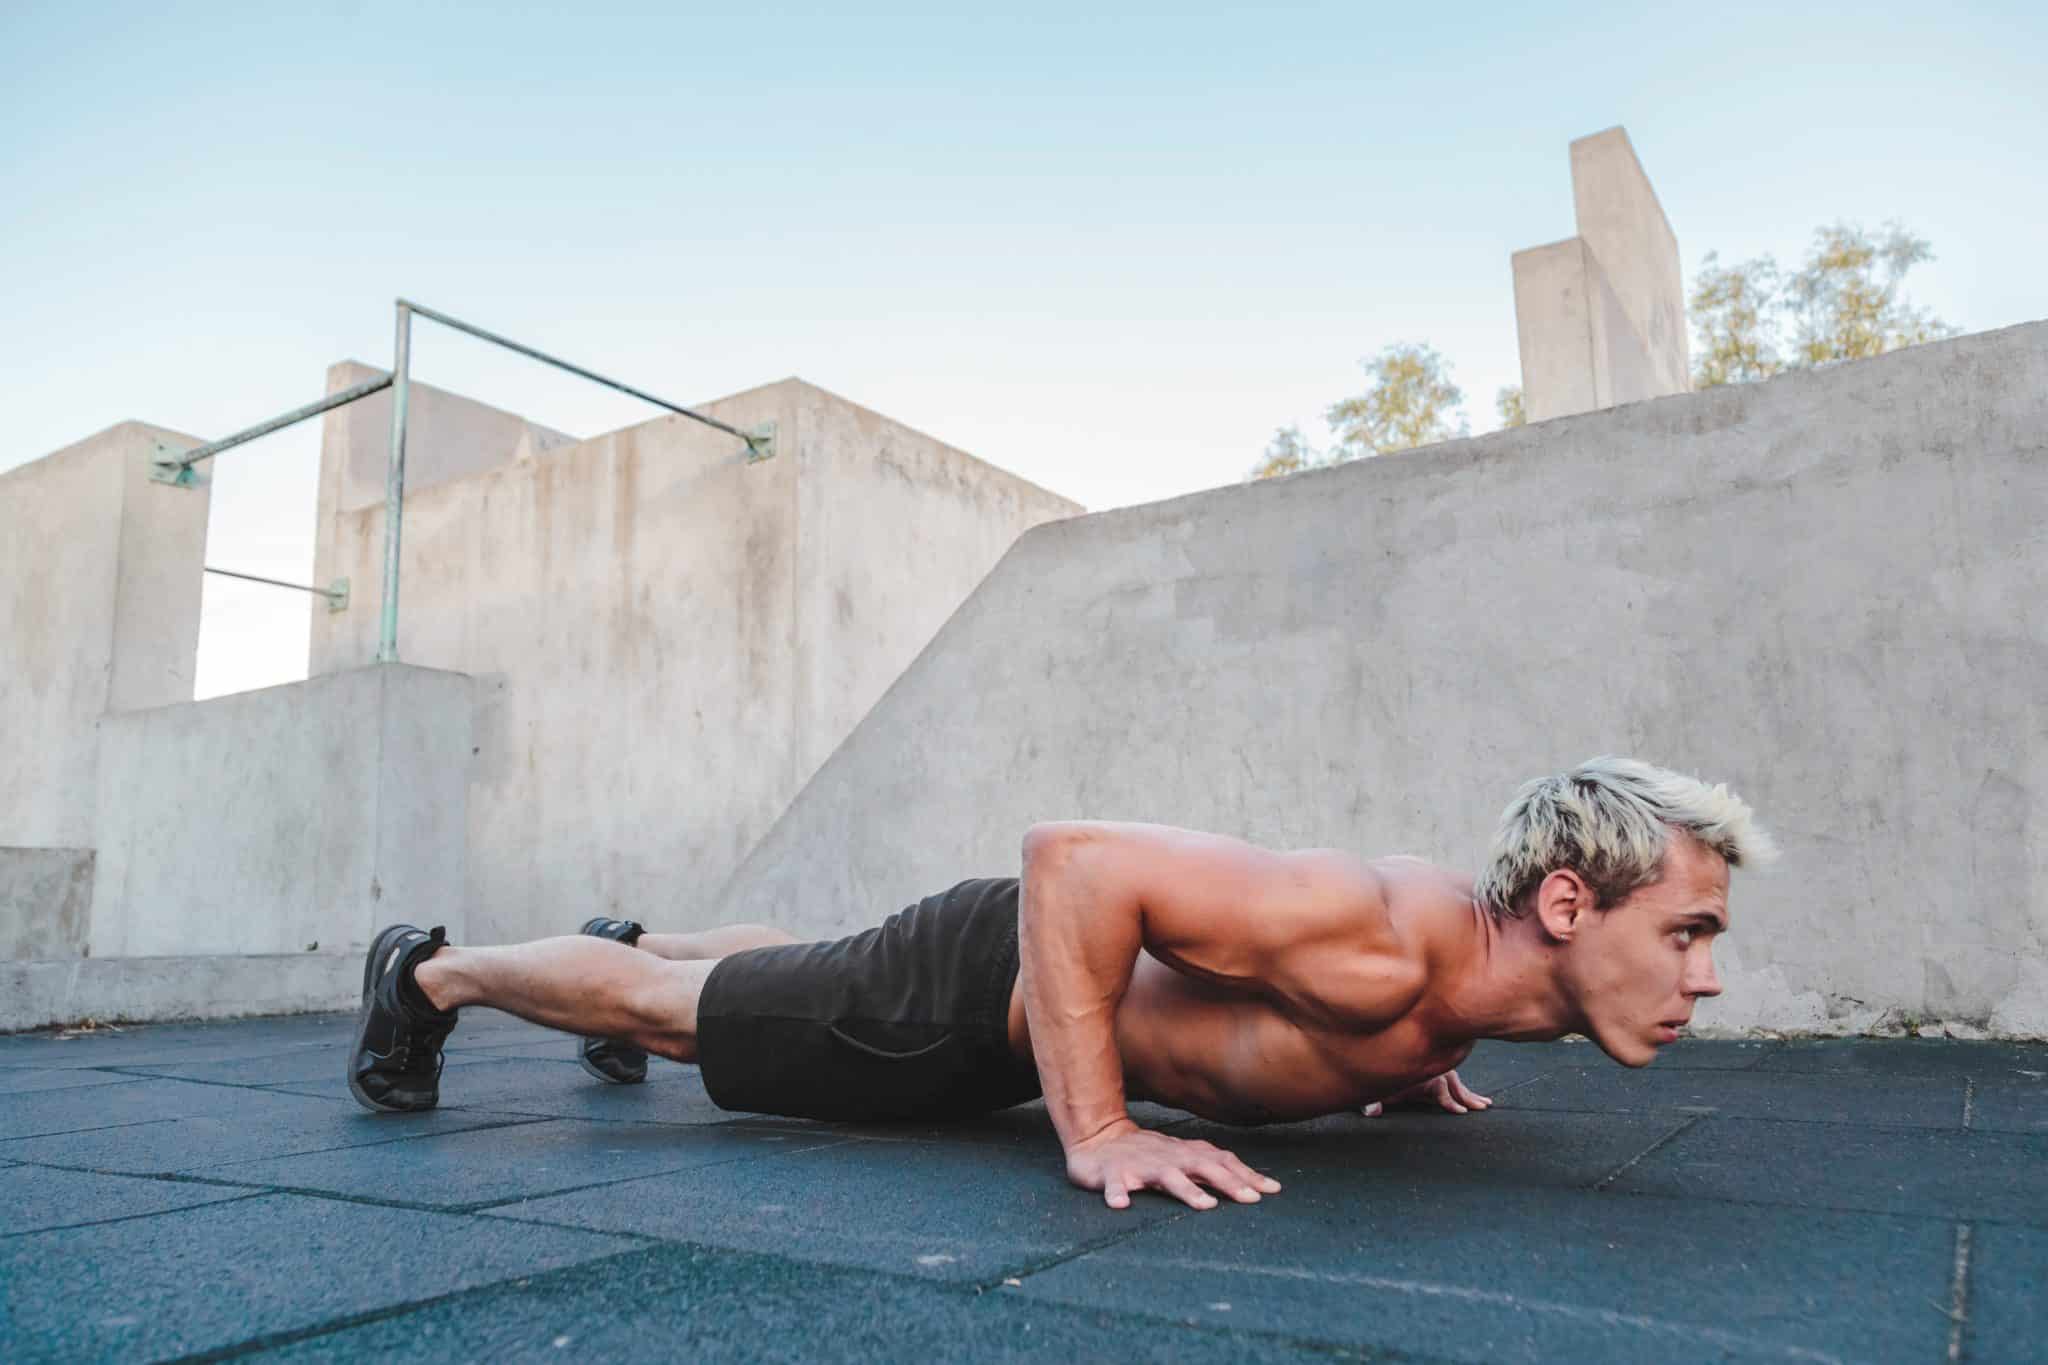 Young athletic man doing push ups on parkour area. Training alone outdoors.